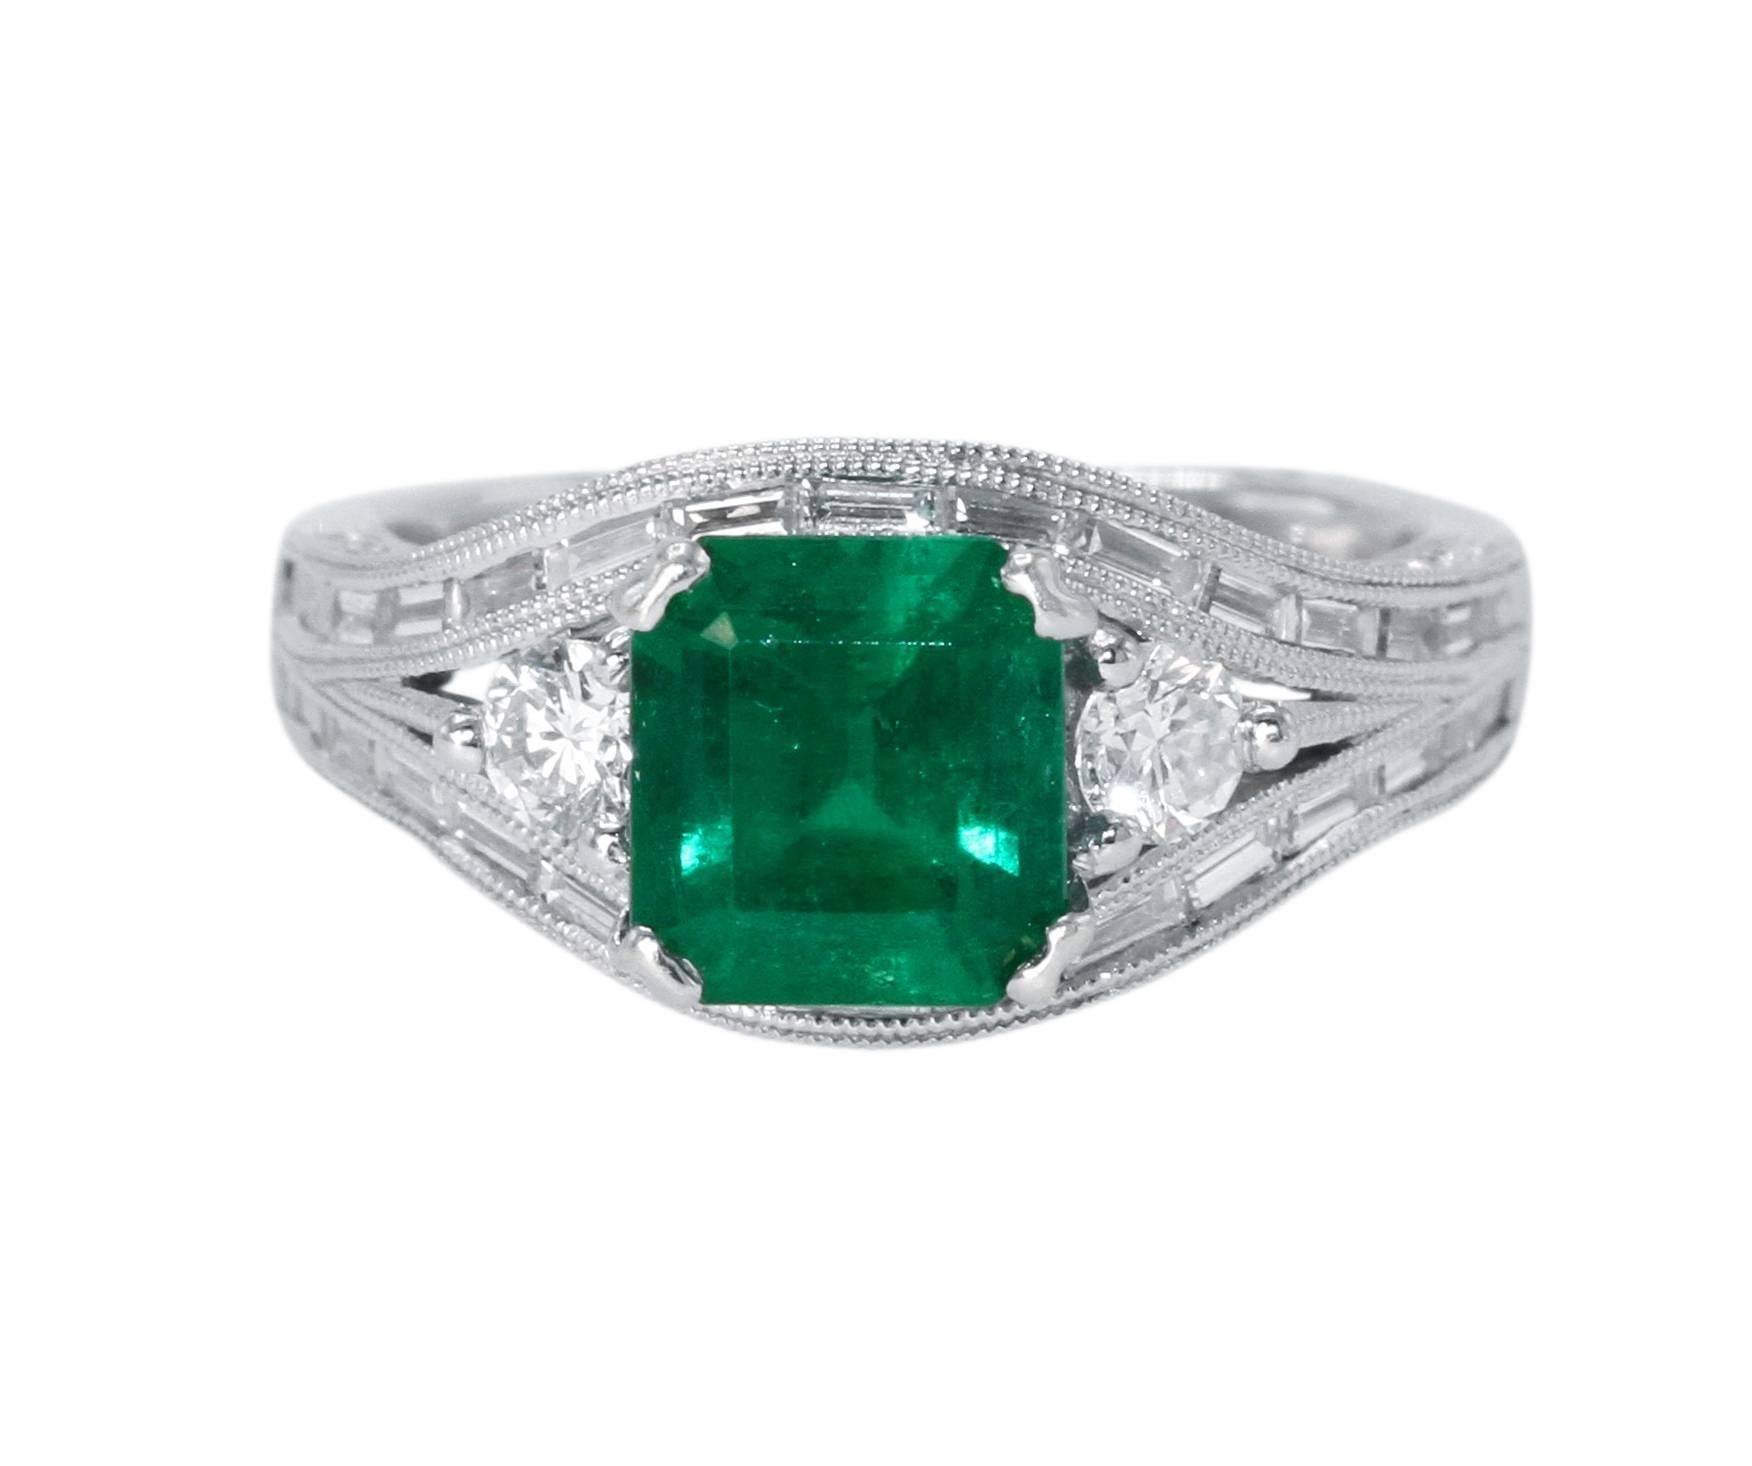 18 Karat White Gold, Emerald and Diamond Ring
• Emerald-cut emerald weighing approximately 1.60 carats
• 74 round and 30 baguette diamonds approximately 1.20 carats
• Stamped 18K 750
• Size 5 1/2, gross weight 7.0 grams